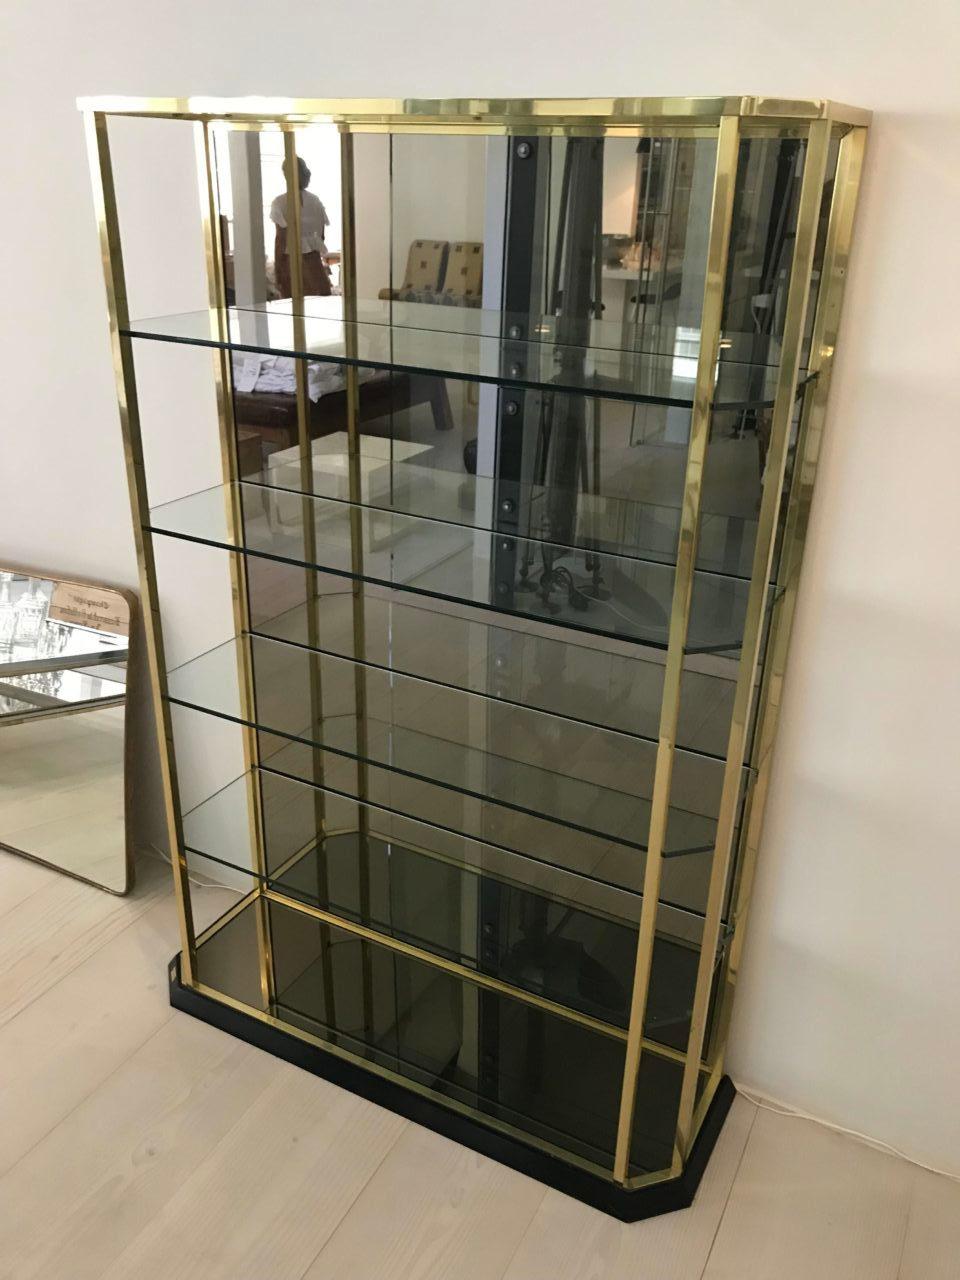 A gorgeous, unique and exclusive Italian shelving unit. Glossily polished brass and mirrored glass. It rests elegantly and seamlessly on a low black lacquered base, has solid quality smoky glass shelves, and the backing is clad in a large mirrored